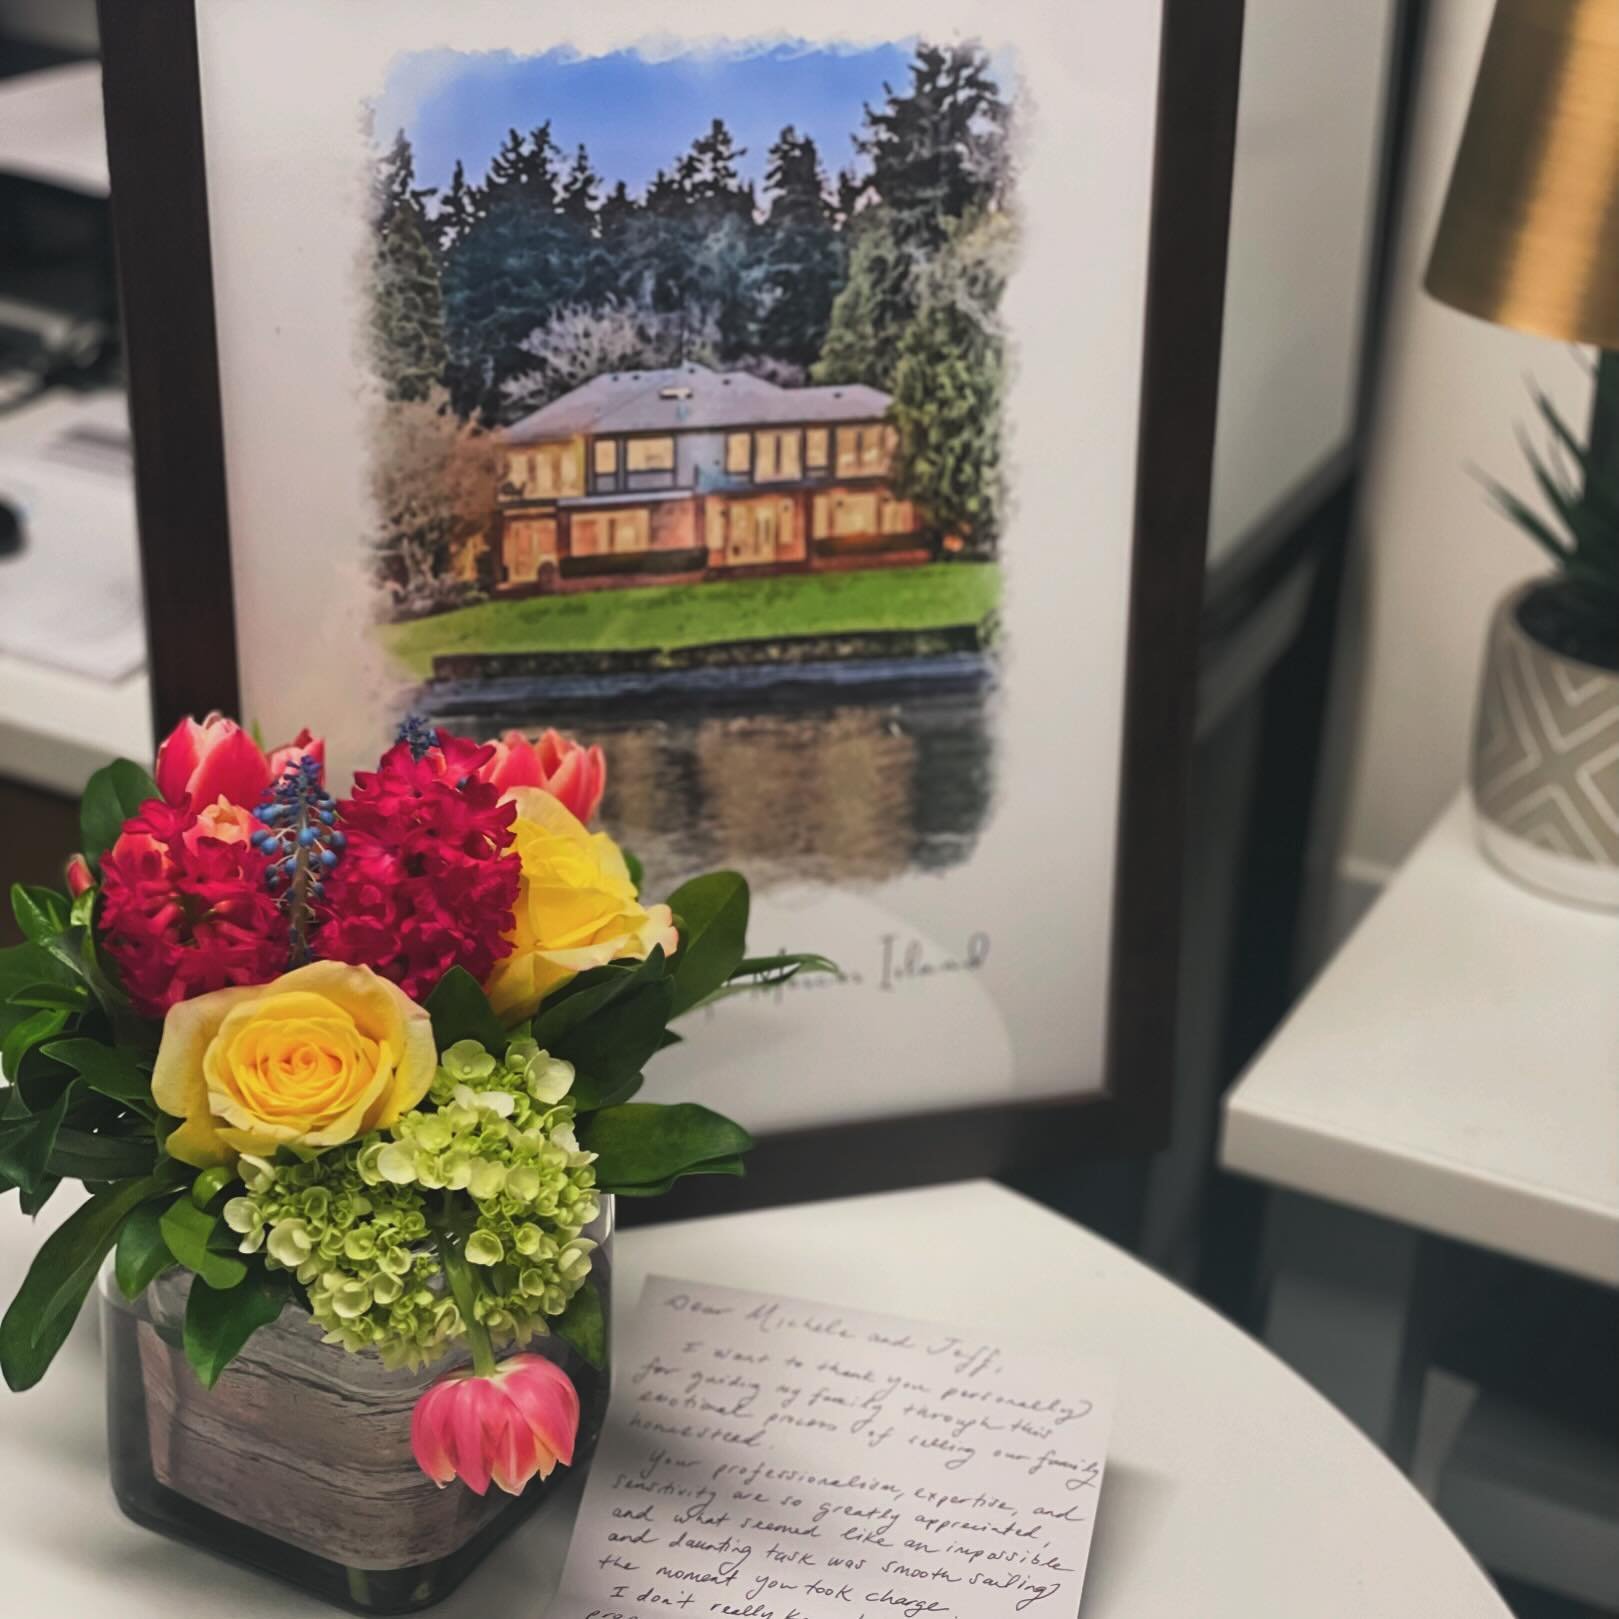 There are moments in this career that truly touch the heart, and this is one of them. Receiving this heartfelt token of appreciation from my wonderful clients fills me with such warmth and gratitude. It&rsquo;s a poignant reminder of the joy and fulf